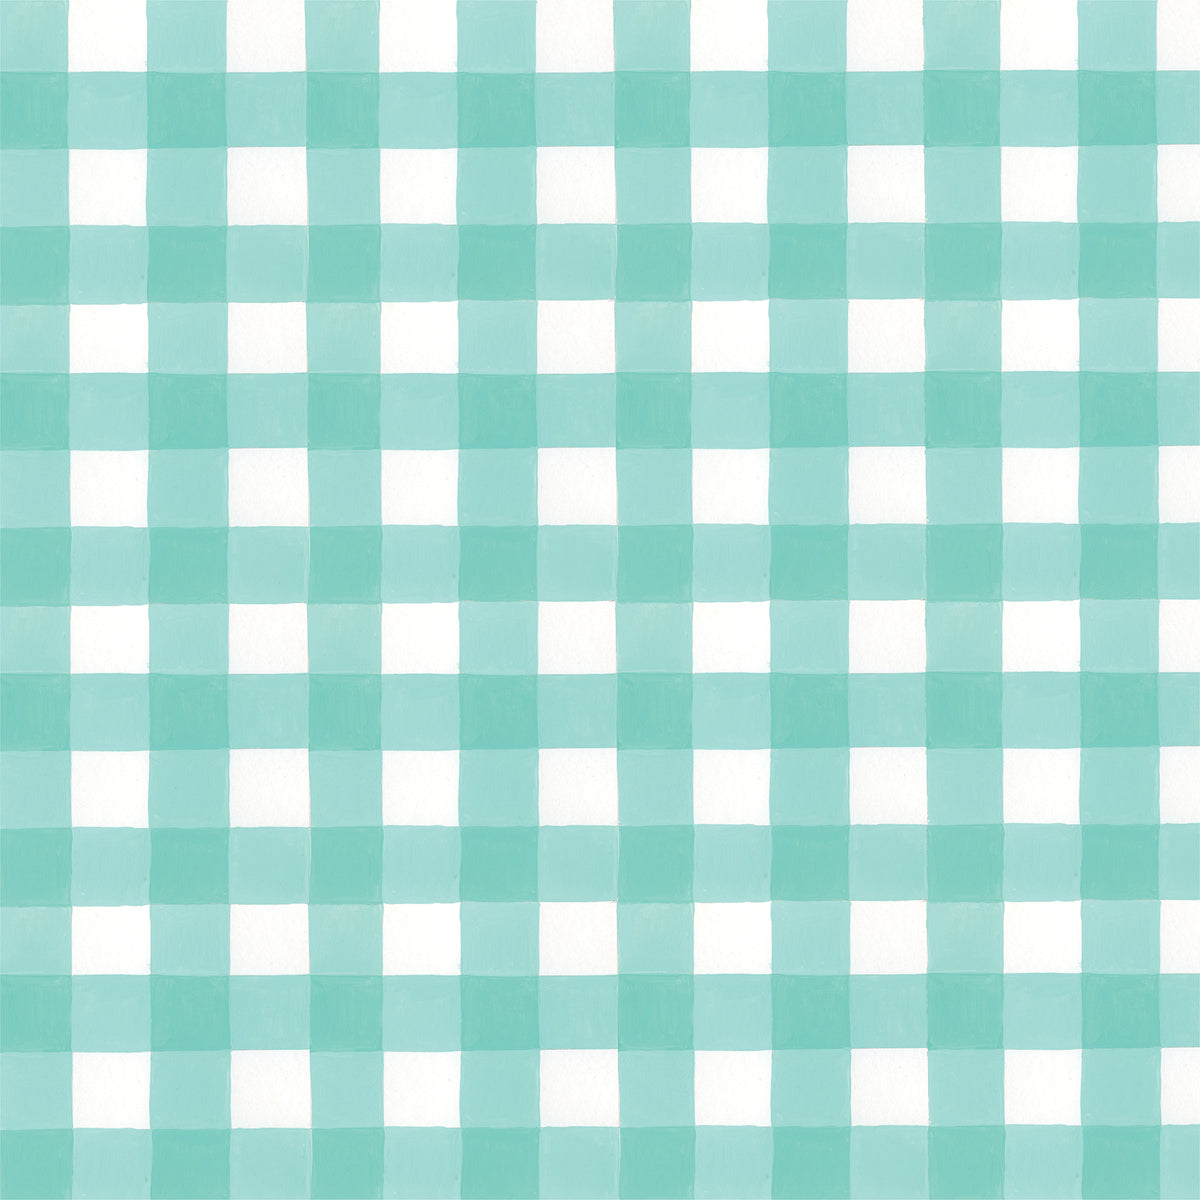 12x12 pastel teal checkboard patterned paper from Echo Park Paper